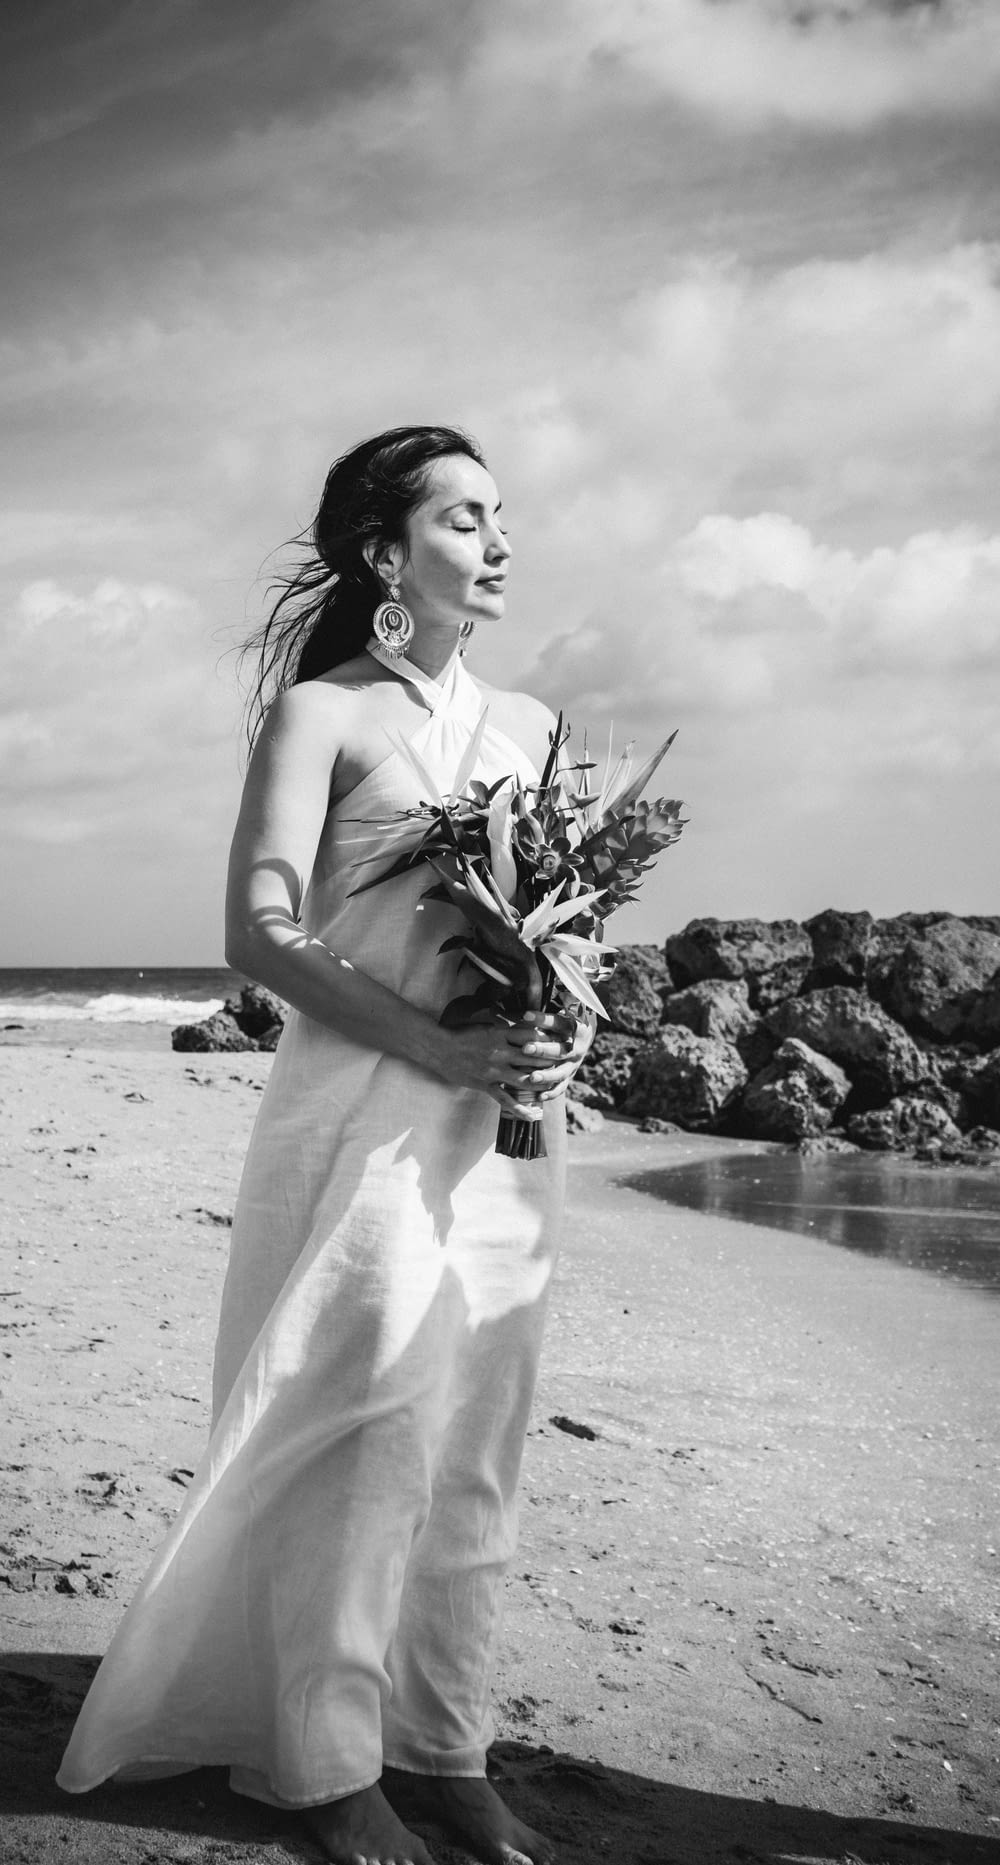 woman in white spaghetti strap dress holding bouquet of flowers standing on beach shore